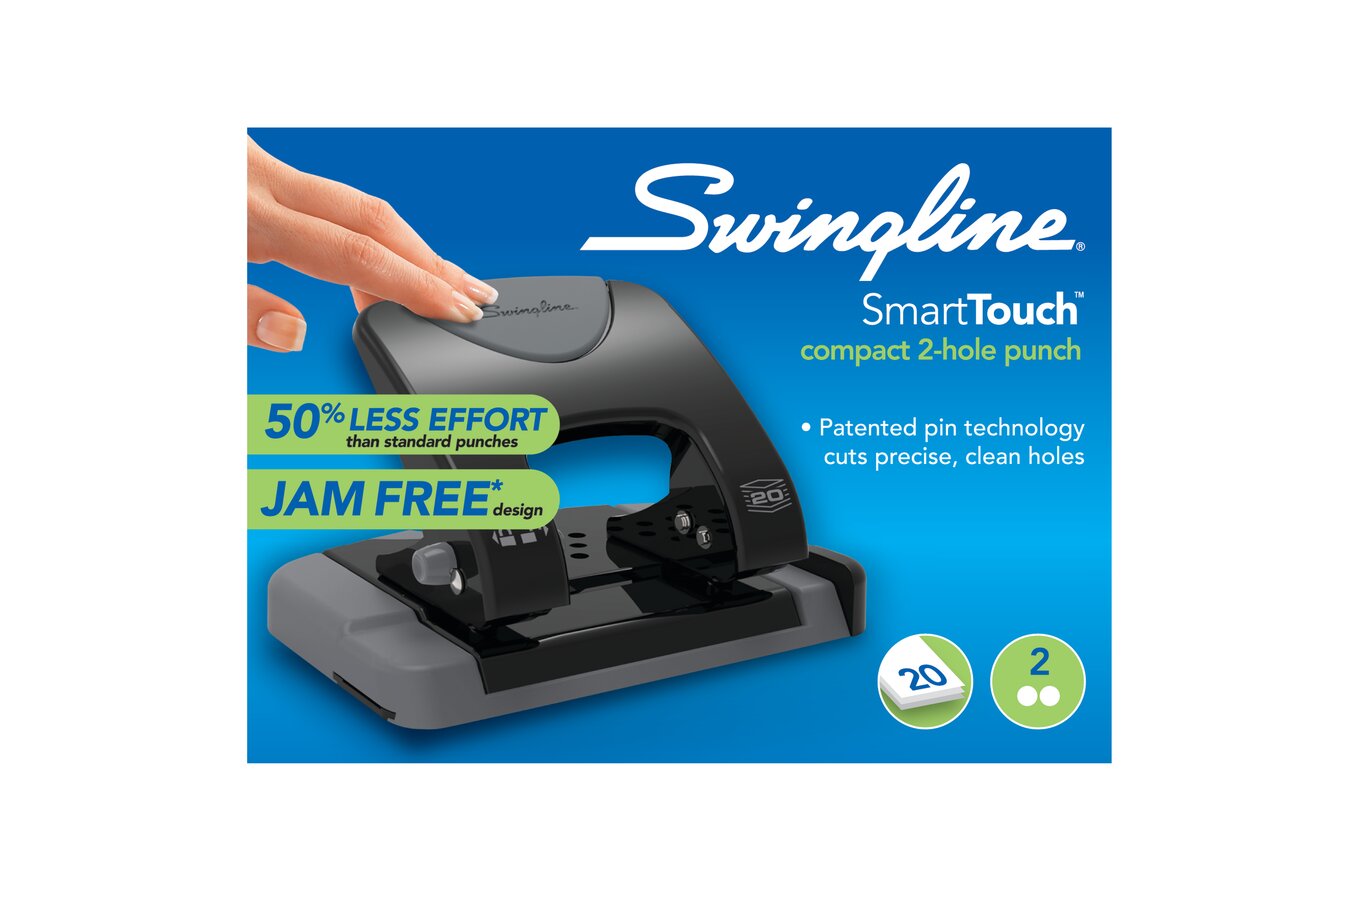 Swingline® LightTouch® High Capacity Desktop Punch, 2-7 Holes, 20 Sheets, Swingline Manual Punches - Desktop Hole Punches